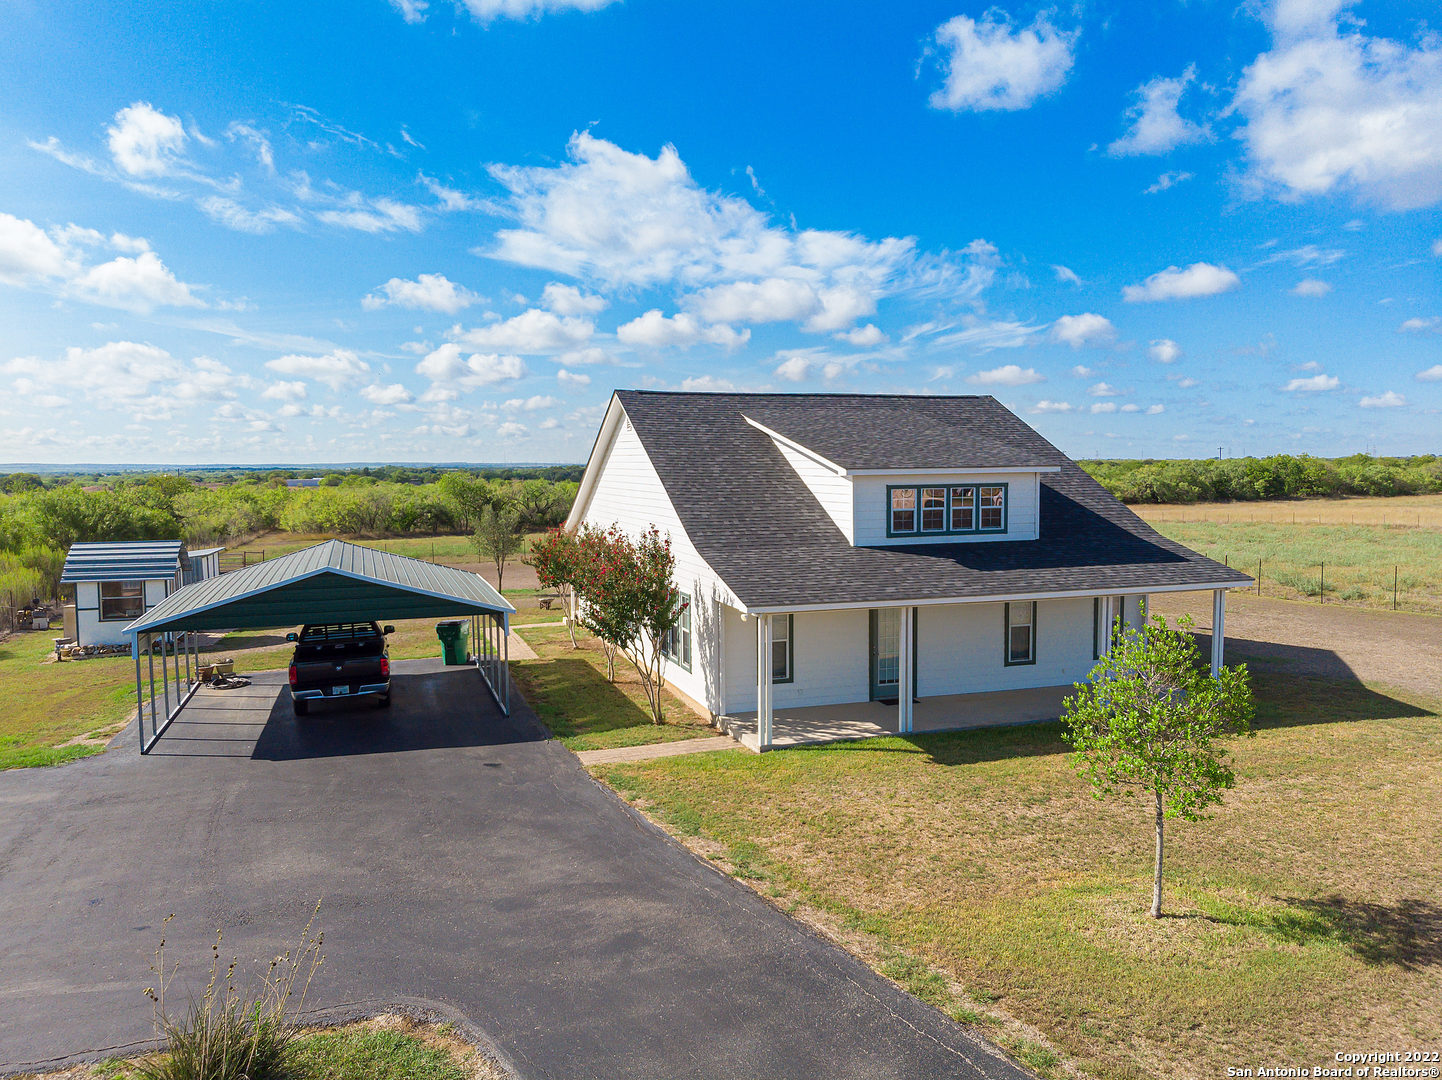 Ideal Texas Ranchette on 5.5 acres! (Outside city limits) The house with 1 acre is fenced separately. This is the perfect location for the commuter. Very close to IH10 on the San Antonio side of town.  The home itself is Beautiful and very well-maintained -it includes 2 Bedrooms with 2 full Baths. The kitchen overlooks the majority of the property and is a chefs dream! Loaded with windows and sunlight plus a full island prepping area and custom cabinets! All of the rooms are large with plenty of possibilities! Very open floor plan! There is also a front and back covered porch for enjoying your mornings and evenings. The property is completely fenced and has an electric gate entrance.  Updates include home exterior Painted 5 years ago and new roof 7 years ago. There is also a 2 car carport and 2 storage buildings. This property is very lightly restricted.